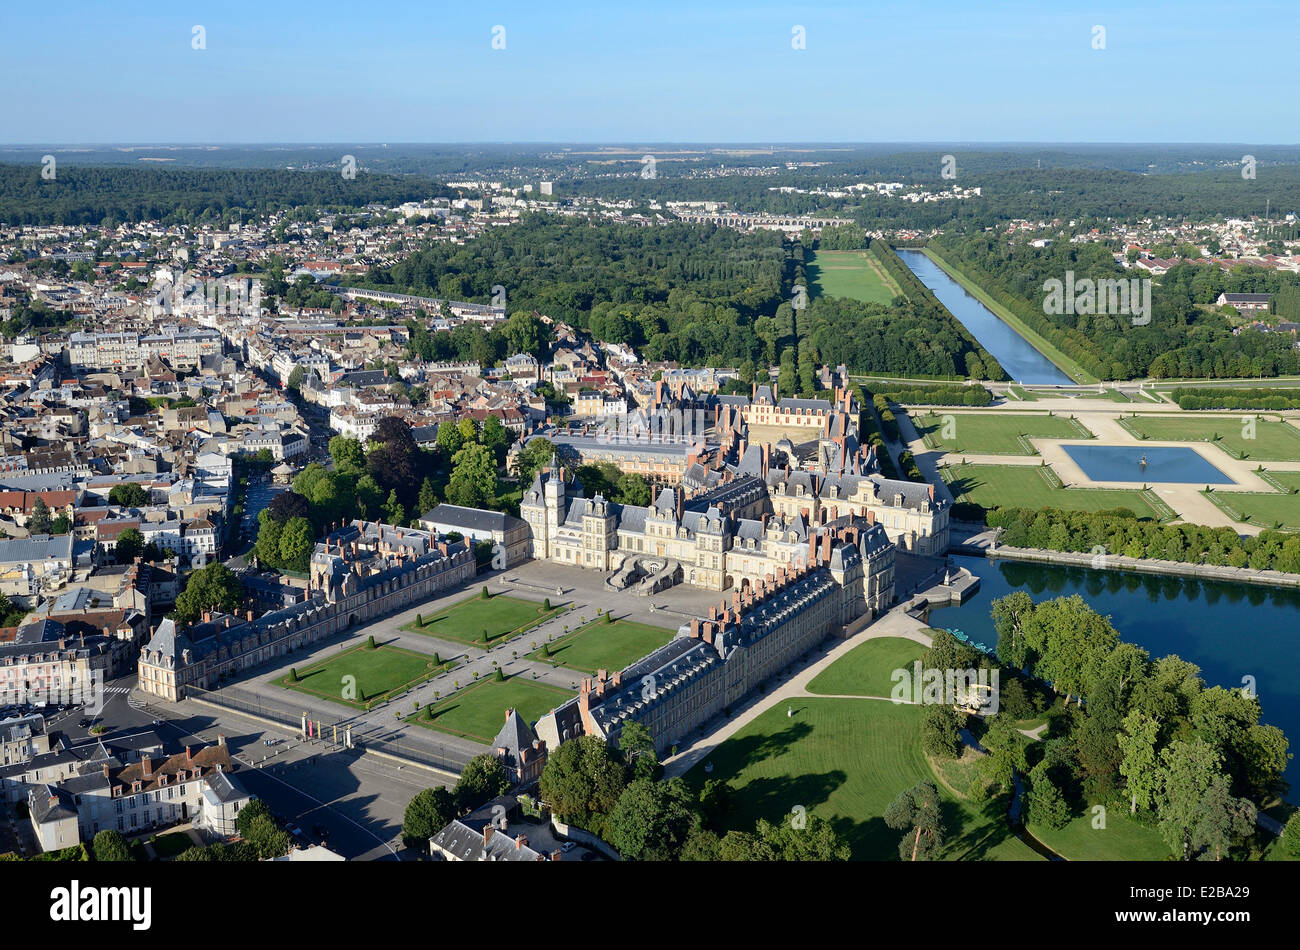 France, Seine et Marne, Fontainebleau, royal castle listed as World Heritage by UNESCO, gardens by Le Notre (aerial view) Stock Photo